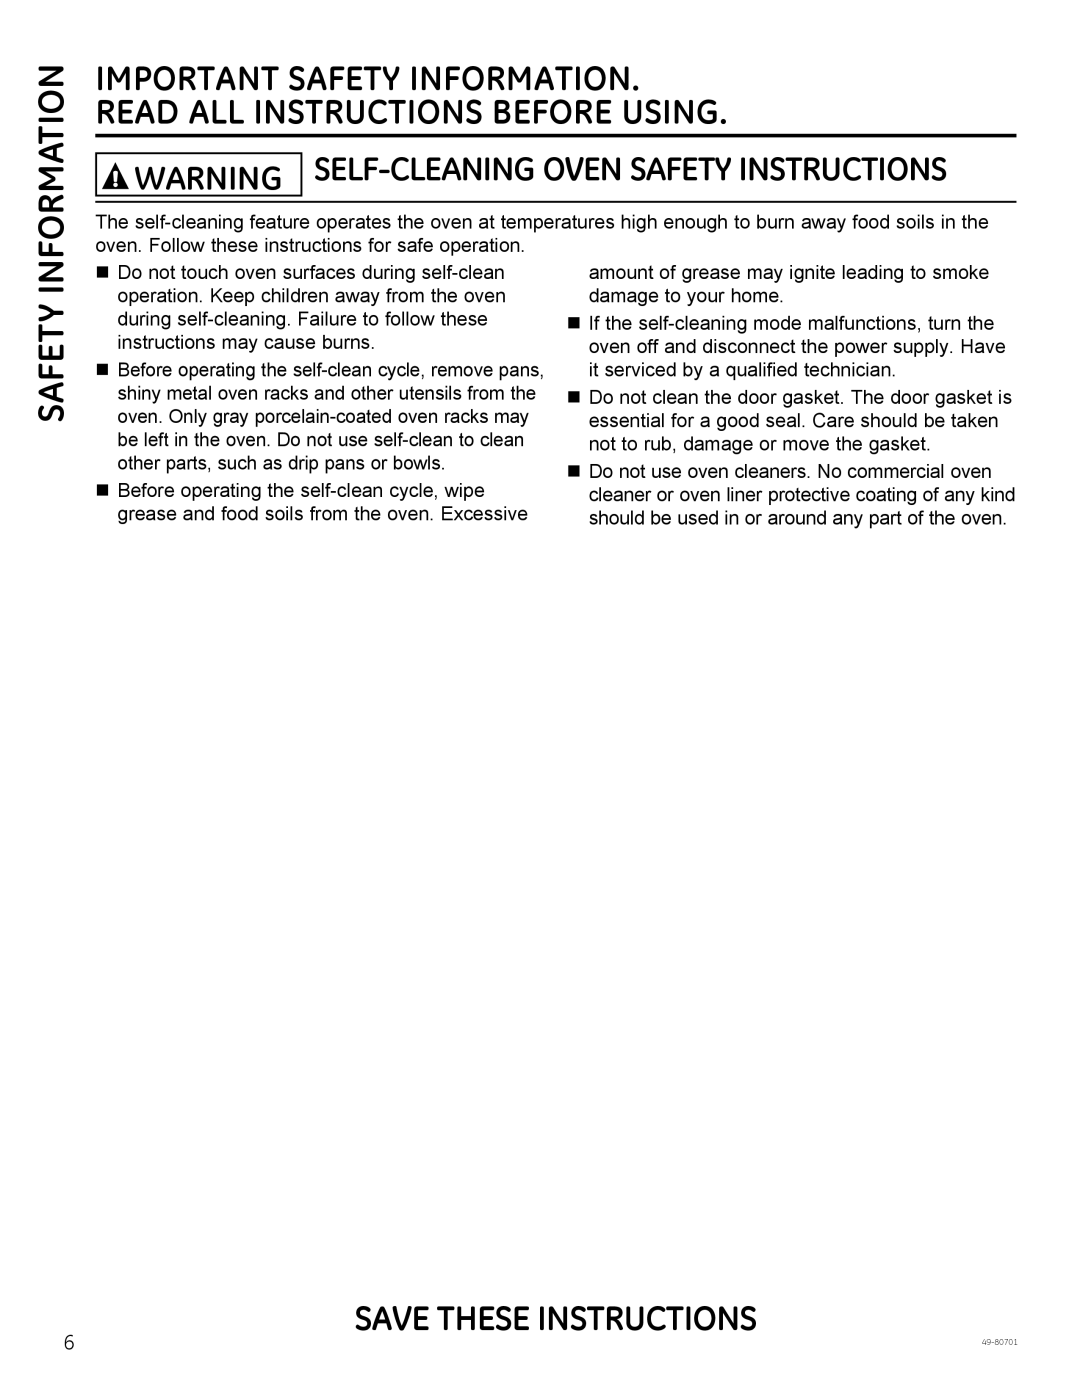 GE JB850, JB870, PB950 owner manual Warning Self-Cleaning Oven Safety Instructions, Information, Save These Instructions 